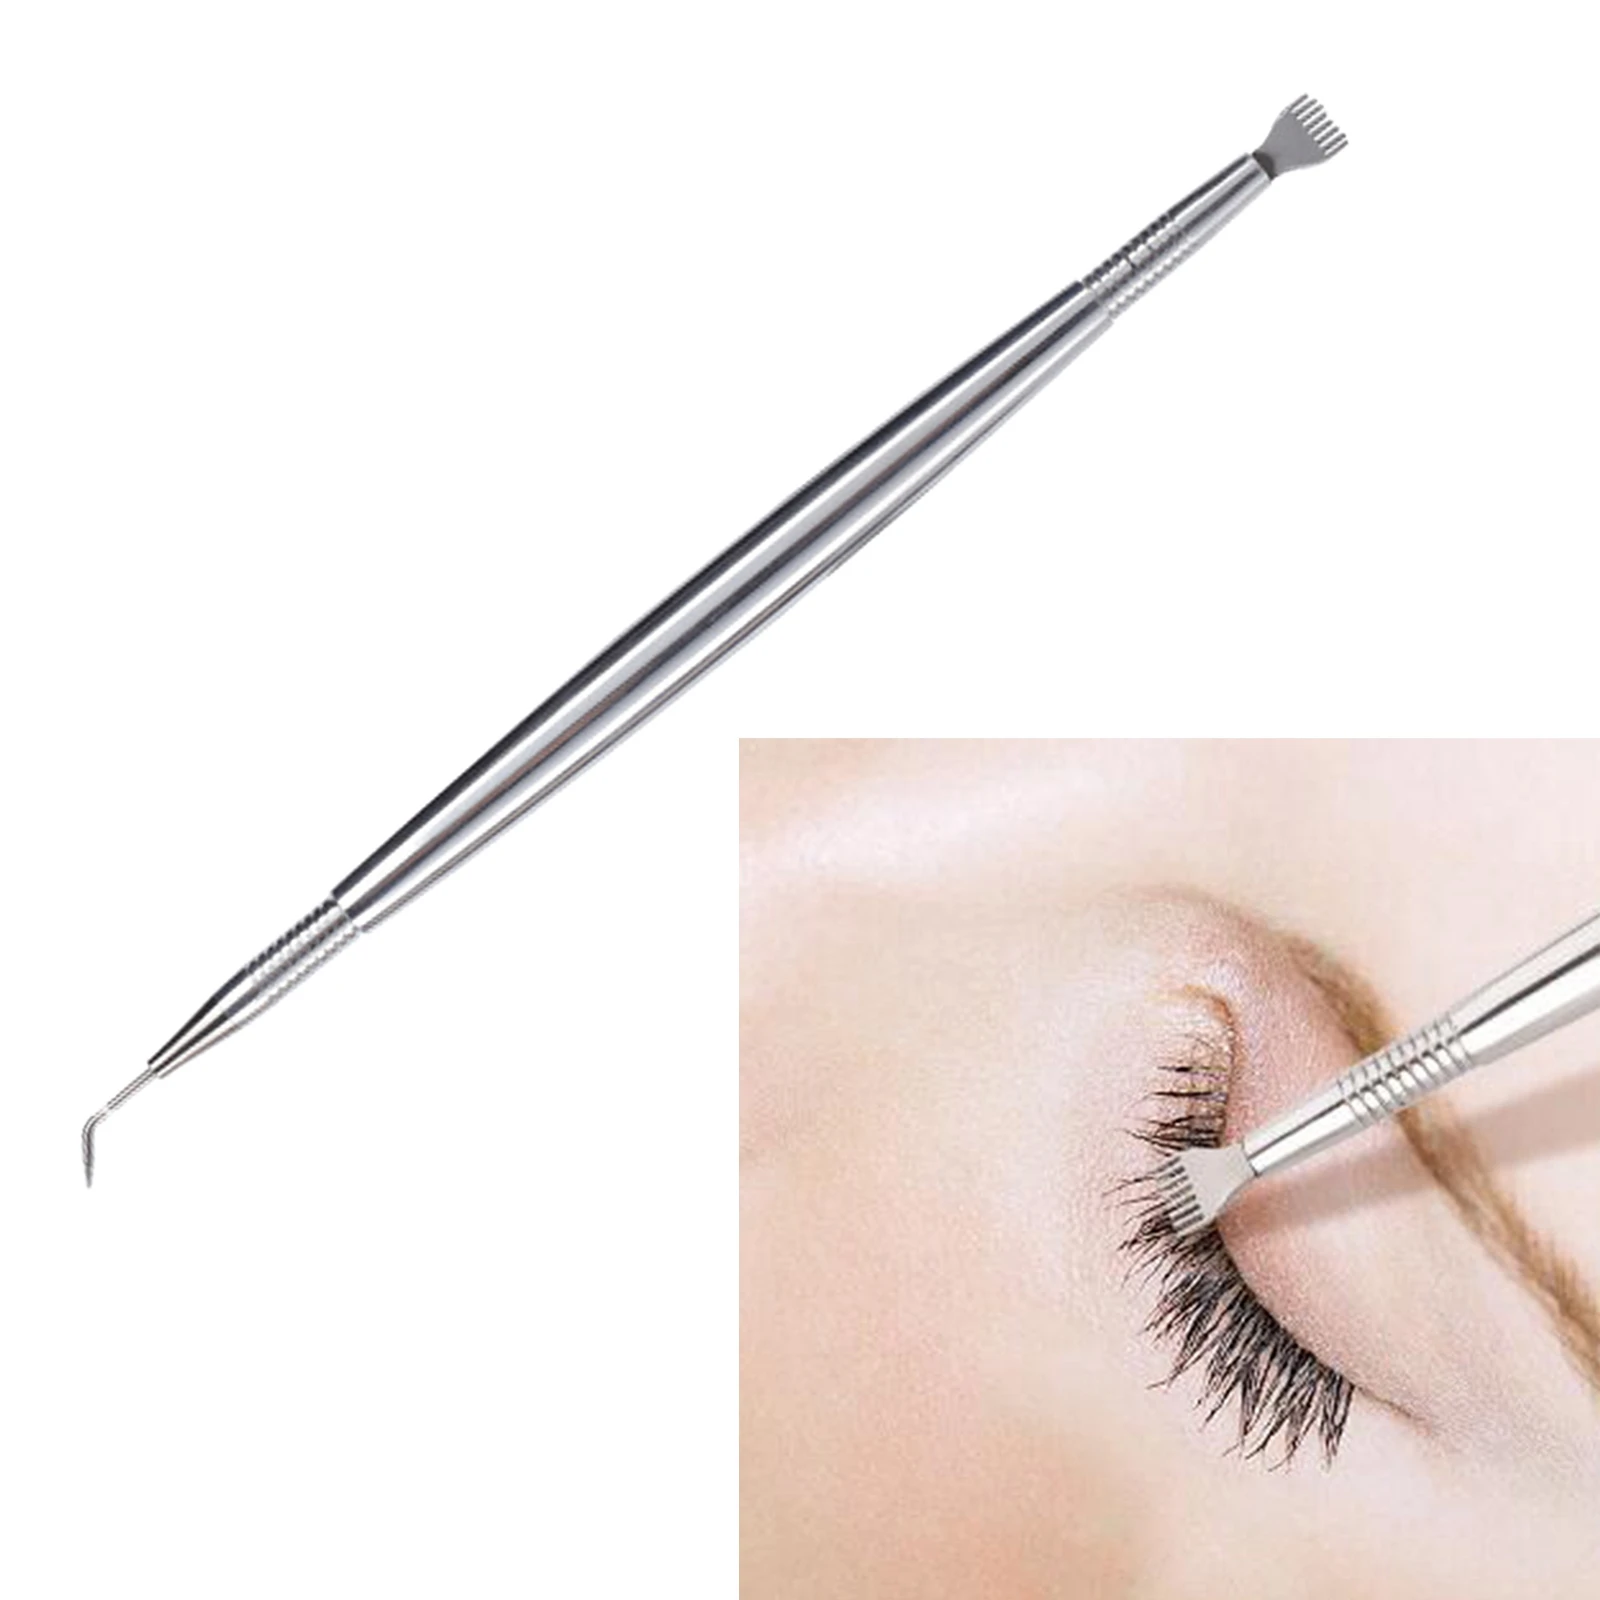 3 in 1 Eyelashes Seperator Perm Tool Tinting Lifter for Beginner Stainless Steel